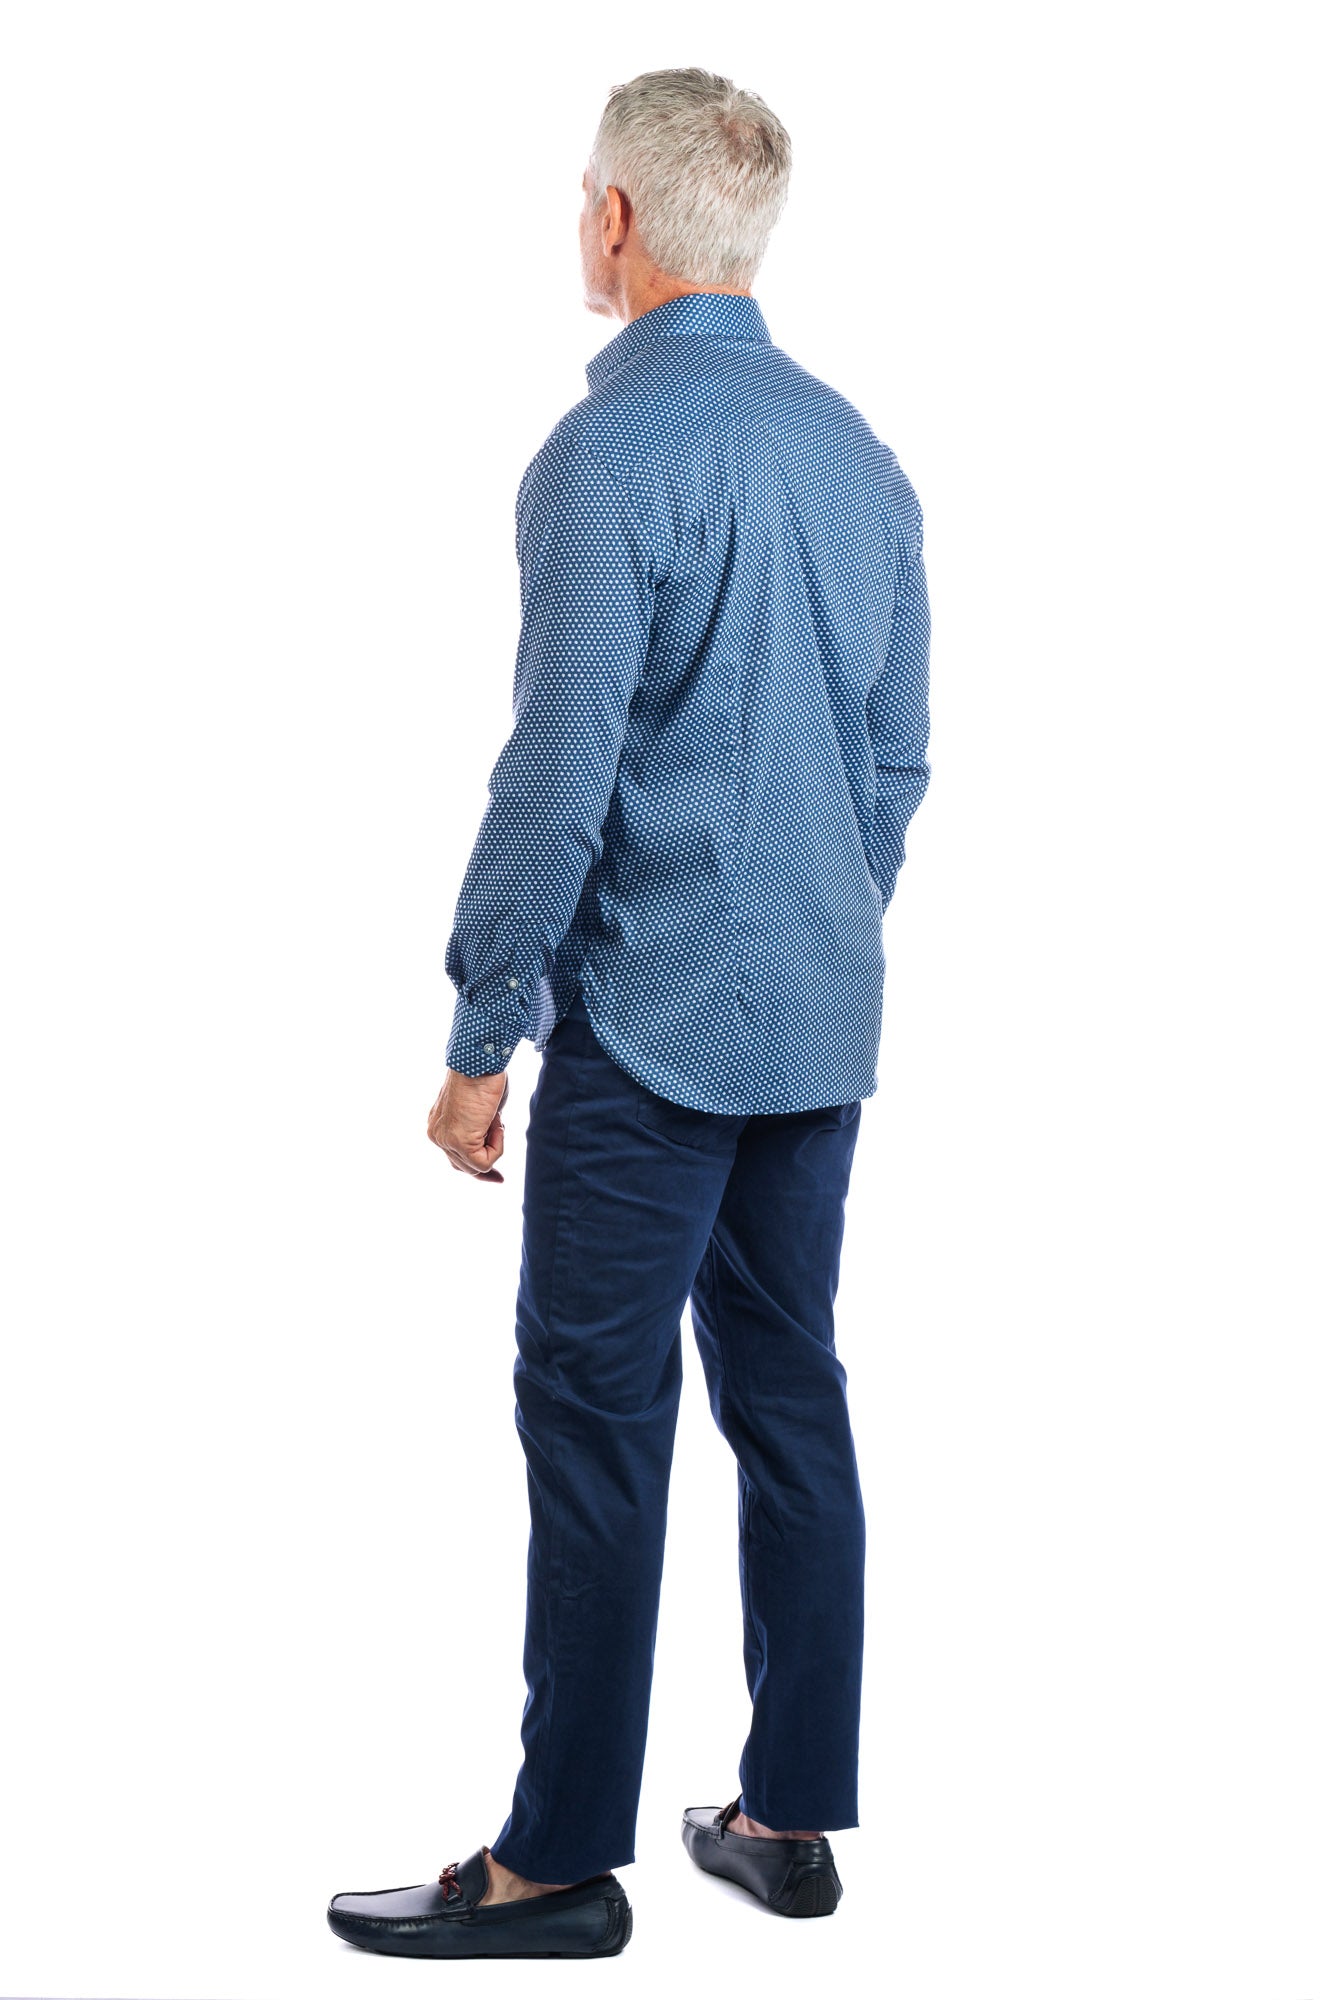 Backside profile photo of model wearing the george navy pants on a white background and looking away from the camera.